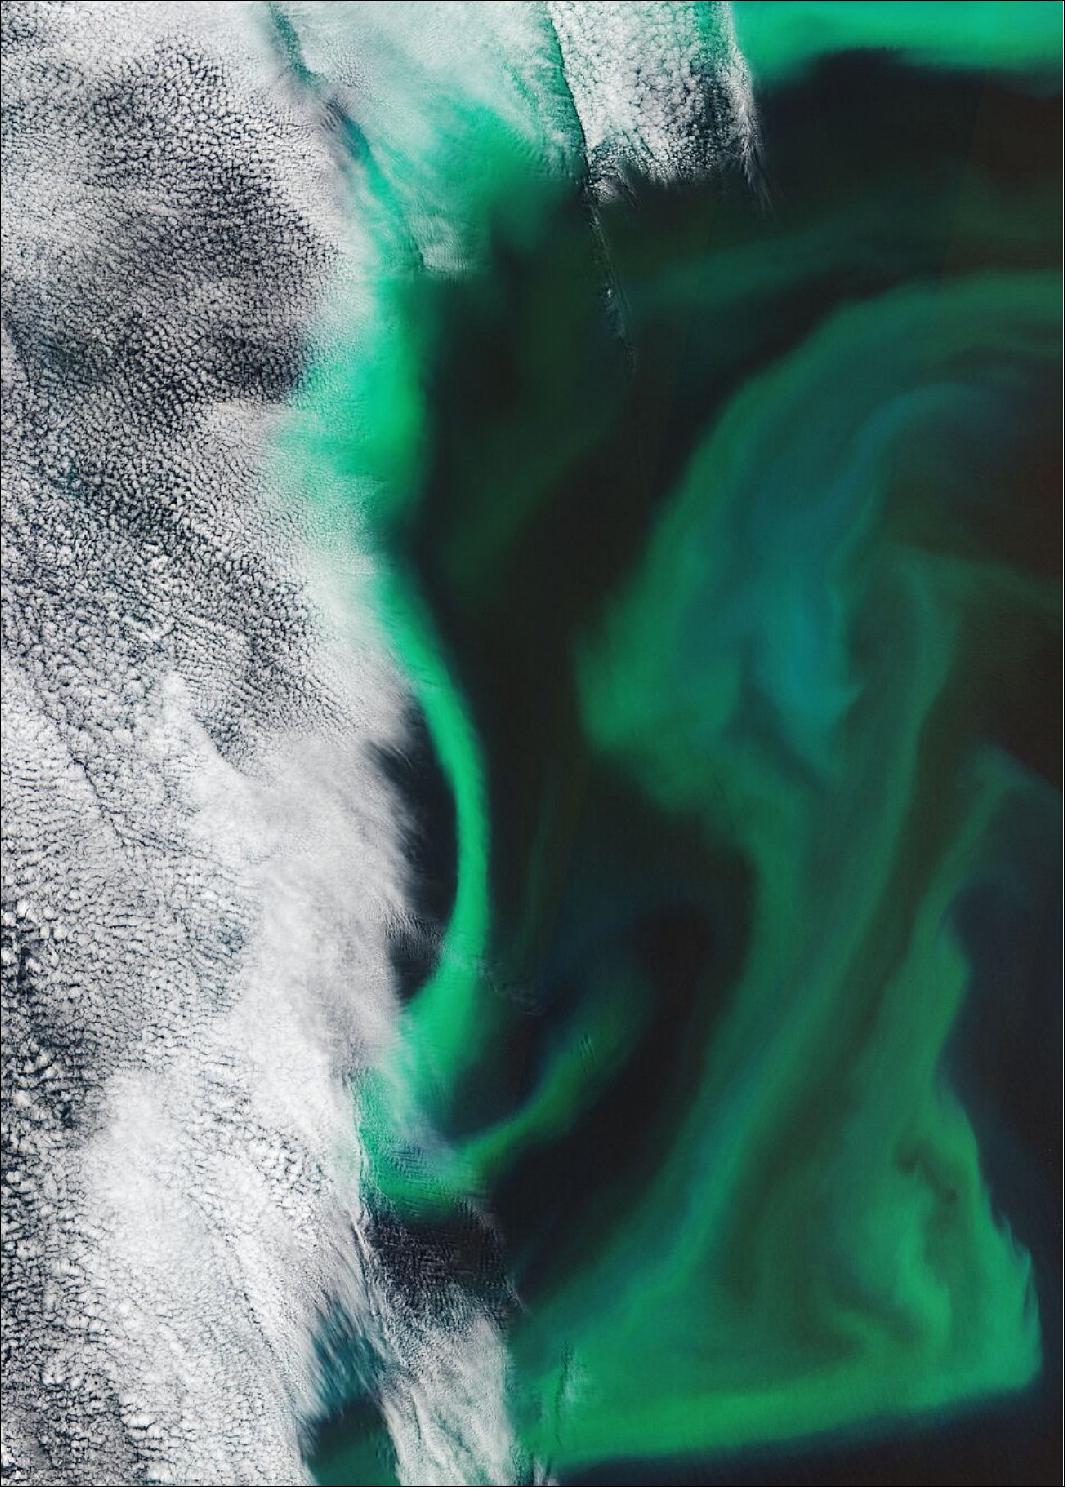 Figure 74: In the image pictured here, captured on 14 June 2019, high concentrations of algae can be seen around 130 km off Hokkaido Island, the second largest island of Japan. This particular algal bloom measured more than 500 km across and 200 km wide, with the area pictured here showing just a small portion of the bloom, around 100 km from north to south and around 110 km from east to west. This image is also featured in this week's Earth from Space Program (image credit: ESA)